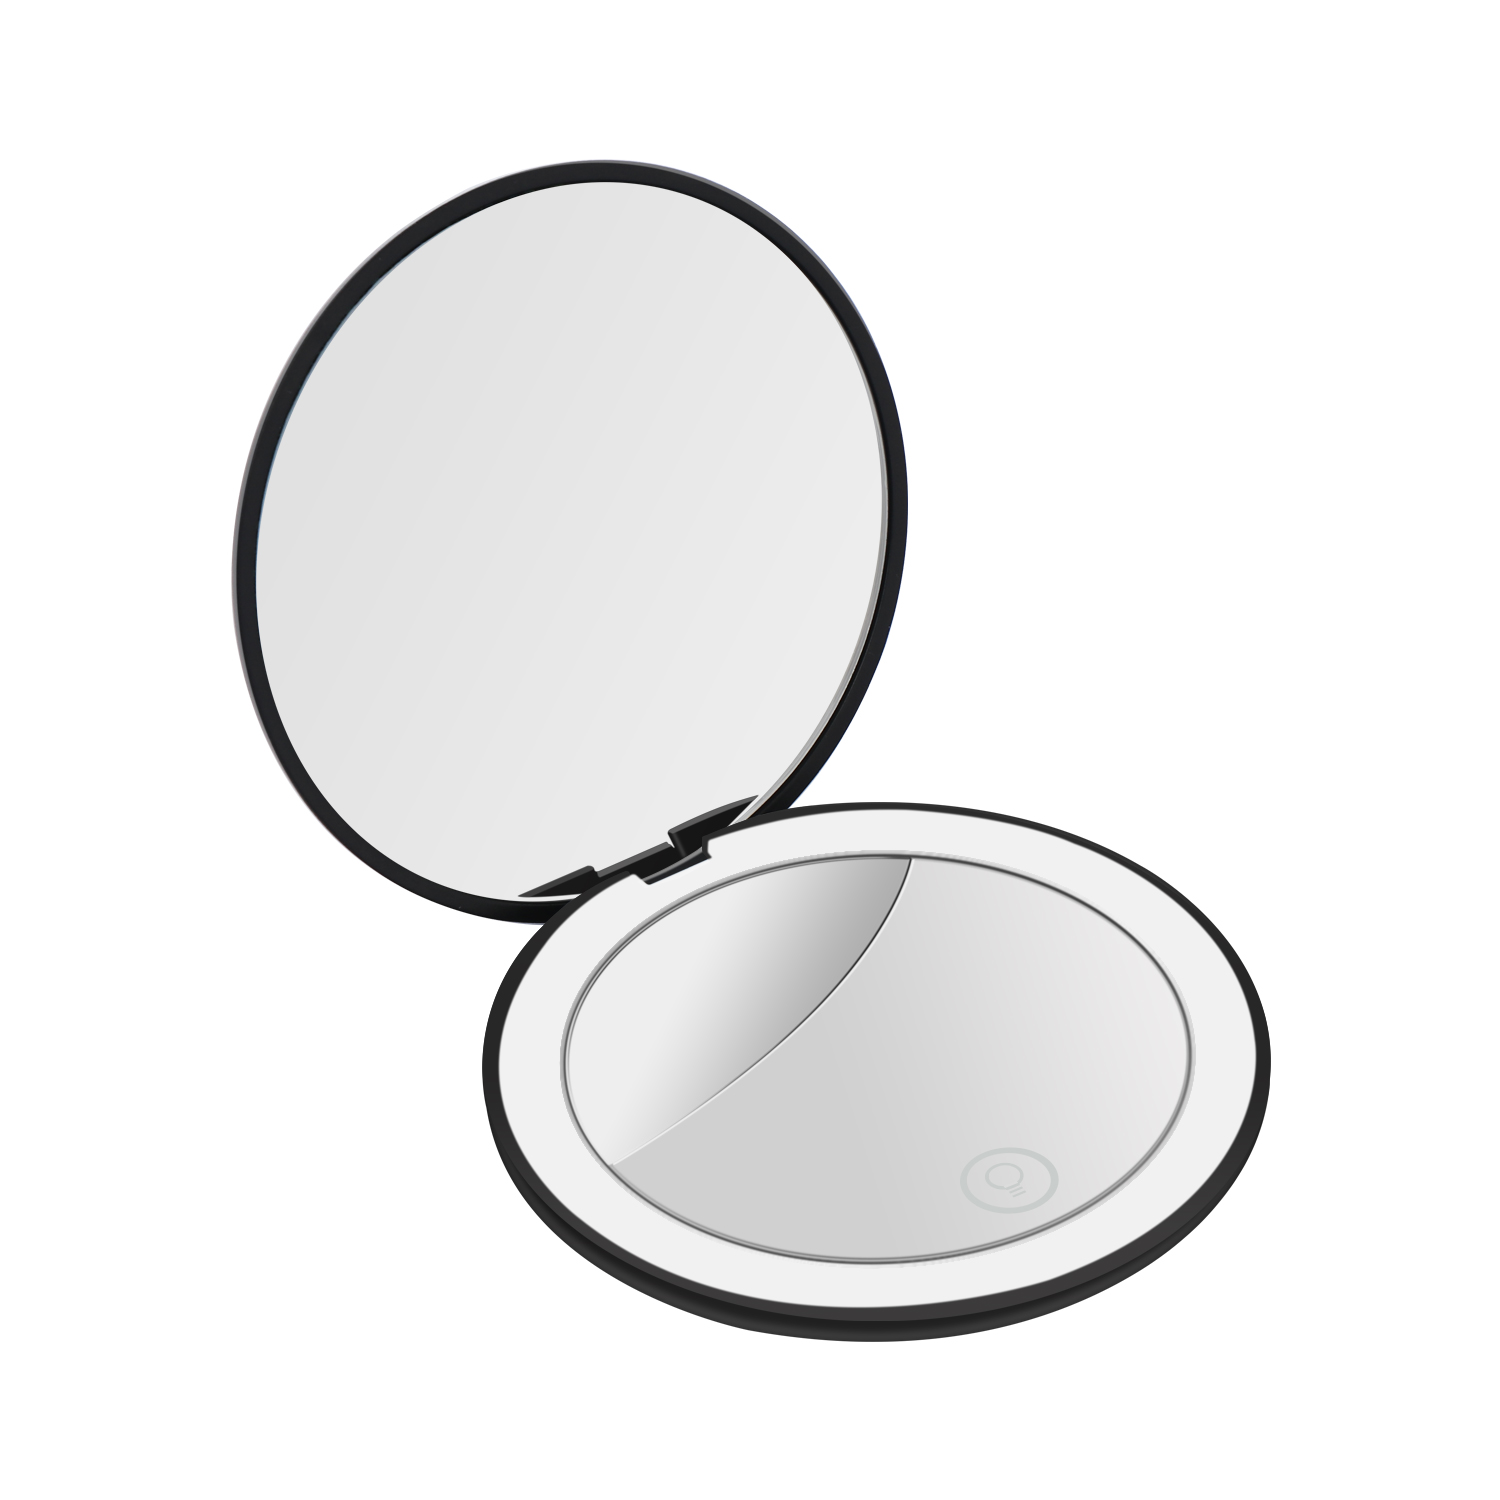 Gold Compact Mirror PNG Clipart Picture | Gallery Yopriceville - Clip ...